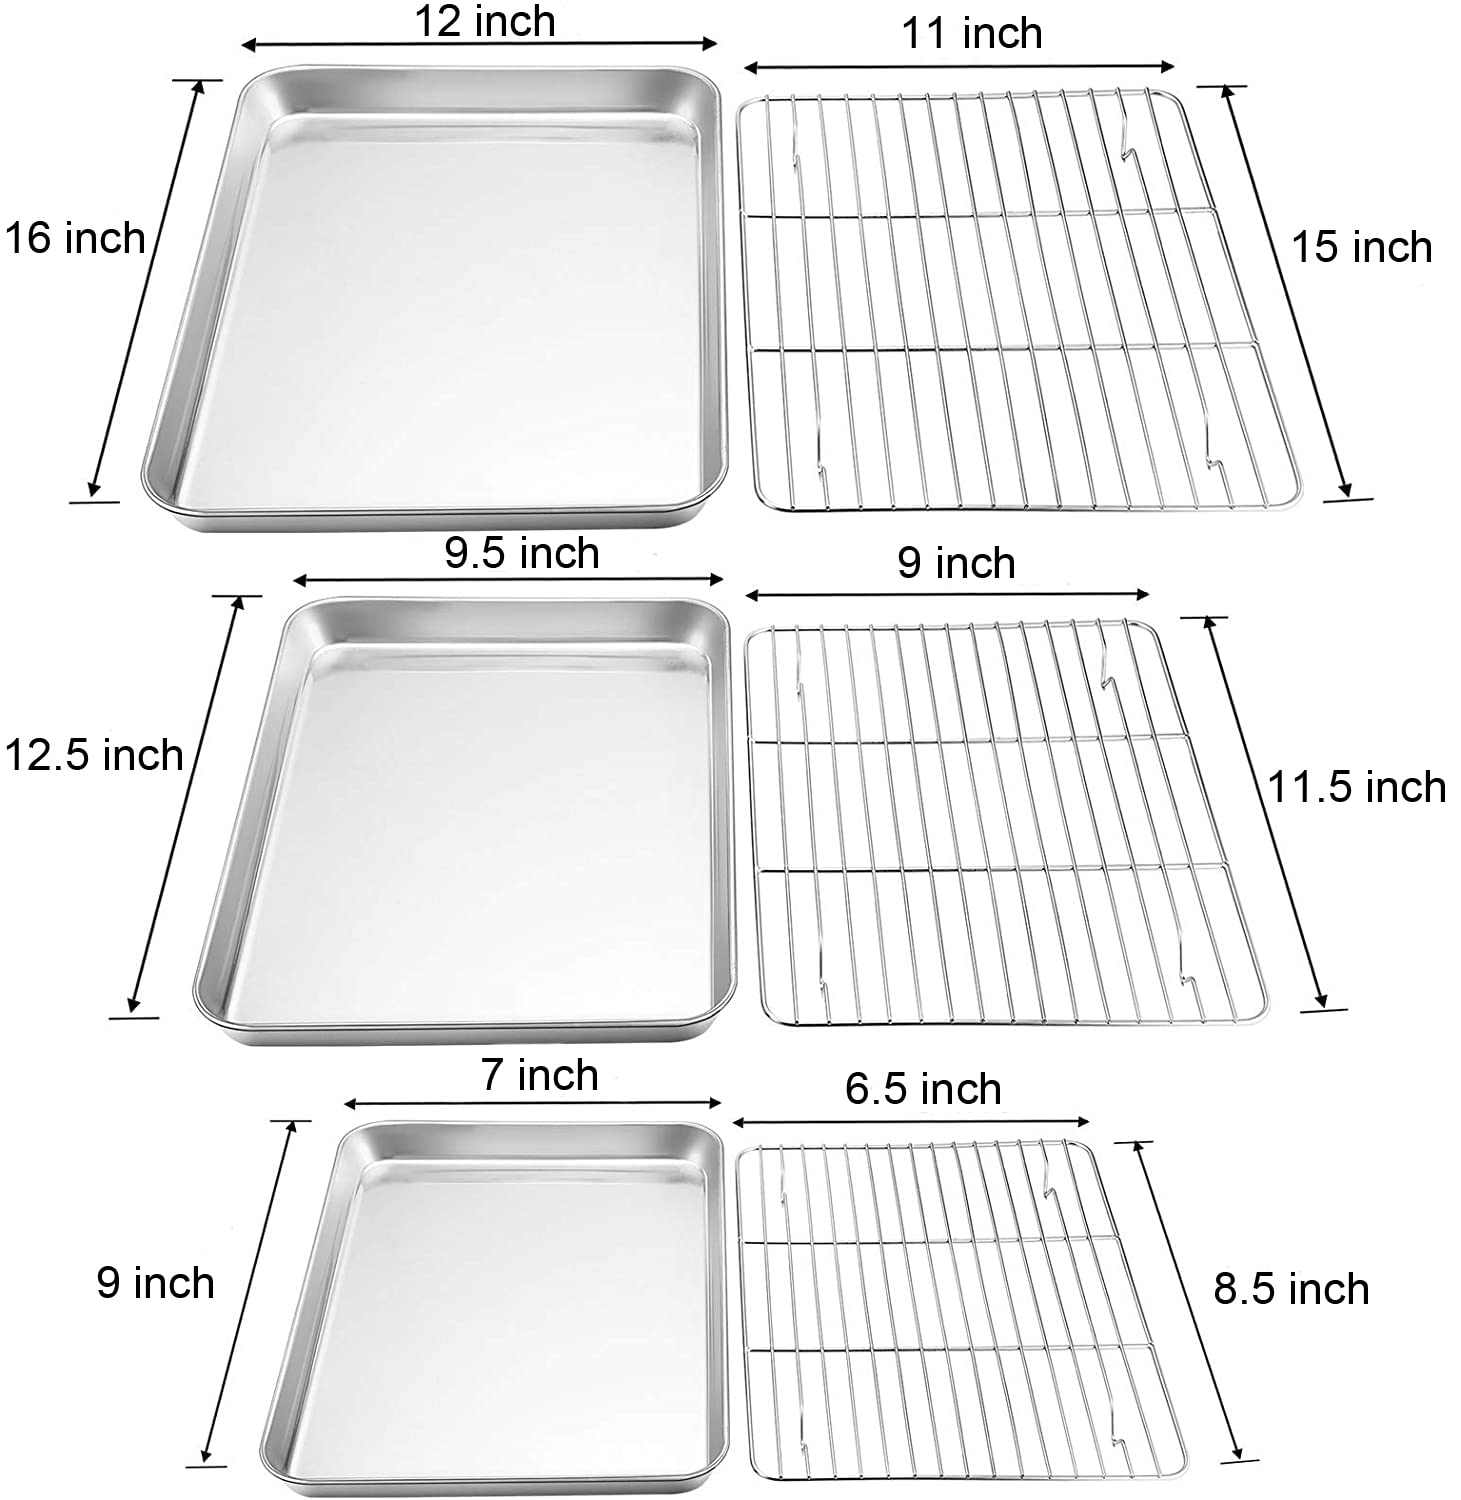 TeamFar Baking Sheet with Rack Set, Stainless Steel Cookie Sheet Baking Pans with Cooling Rack, Non Toxic & Healthy, Rust Free & Heavy Duty, Mirror Finish & Easy Clean, Dishwasher Safe - 6 Pieces